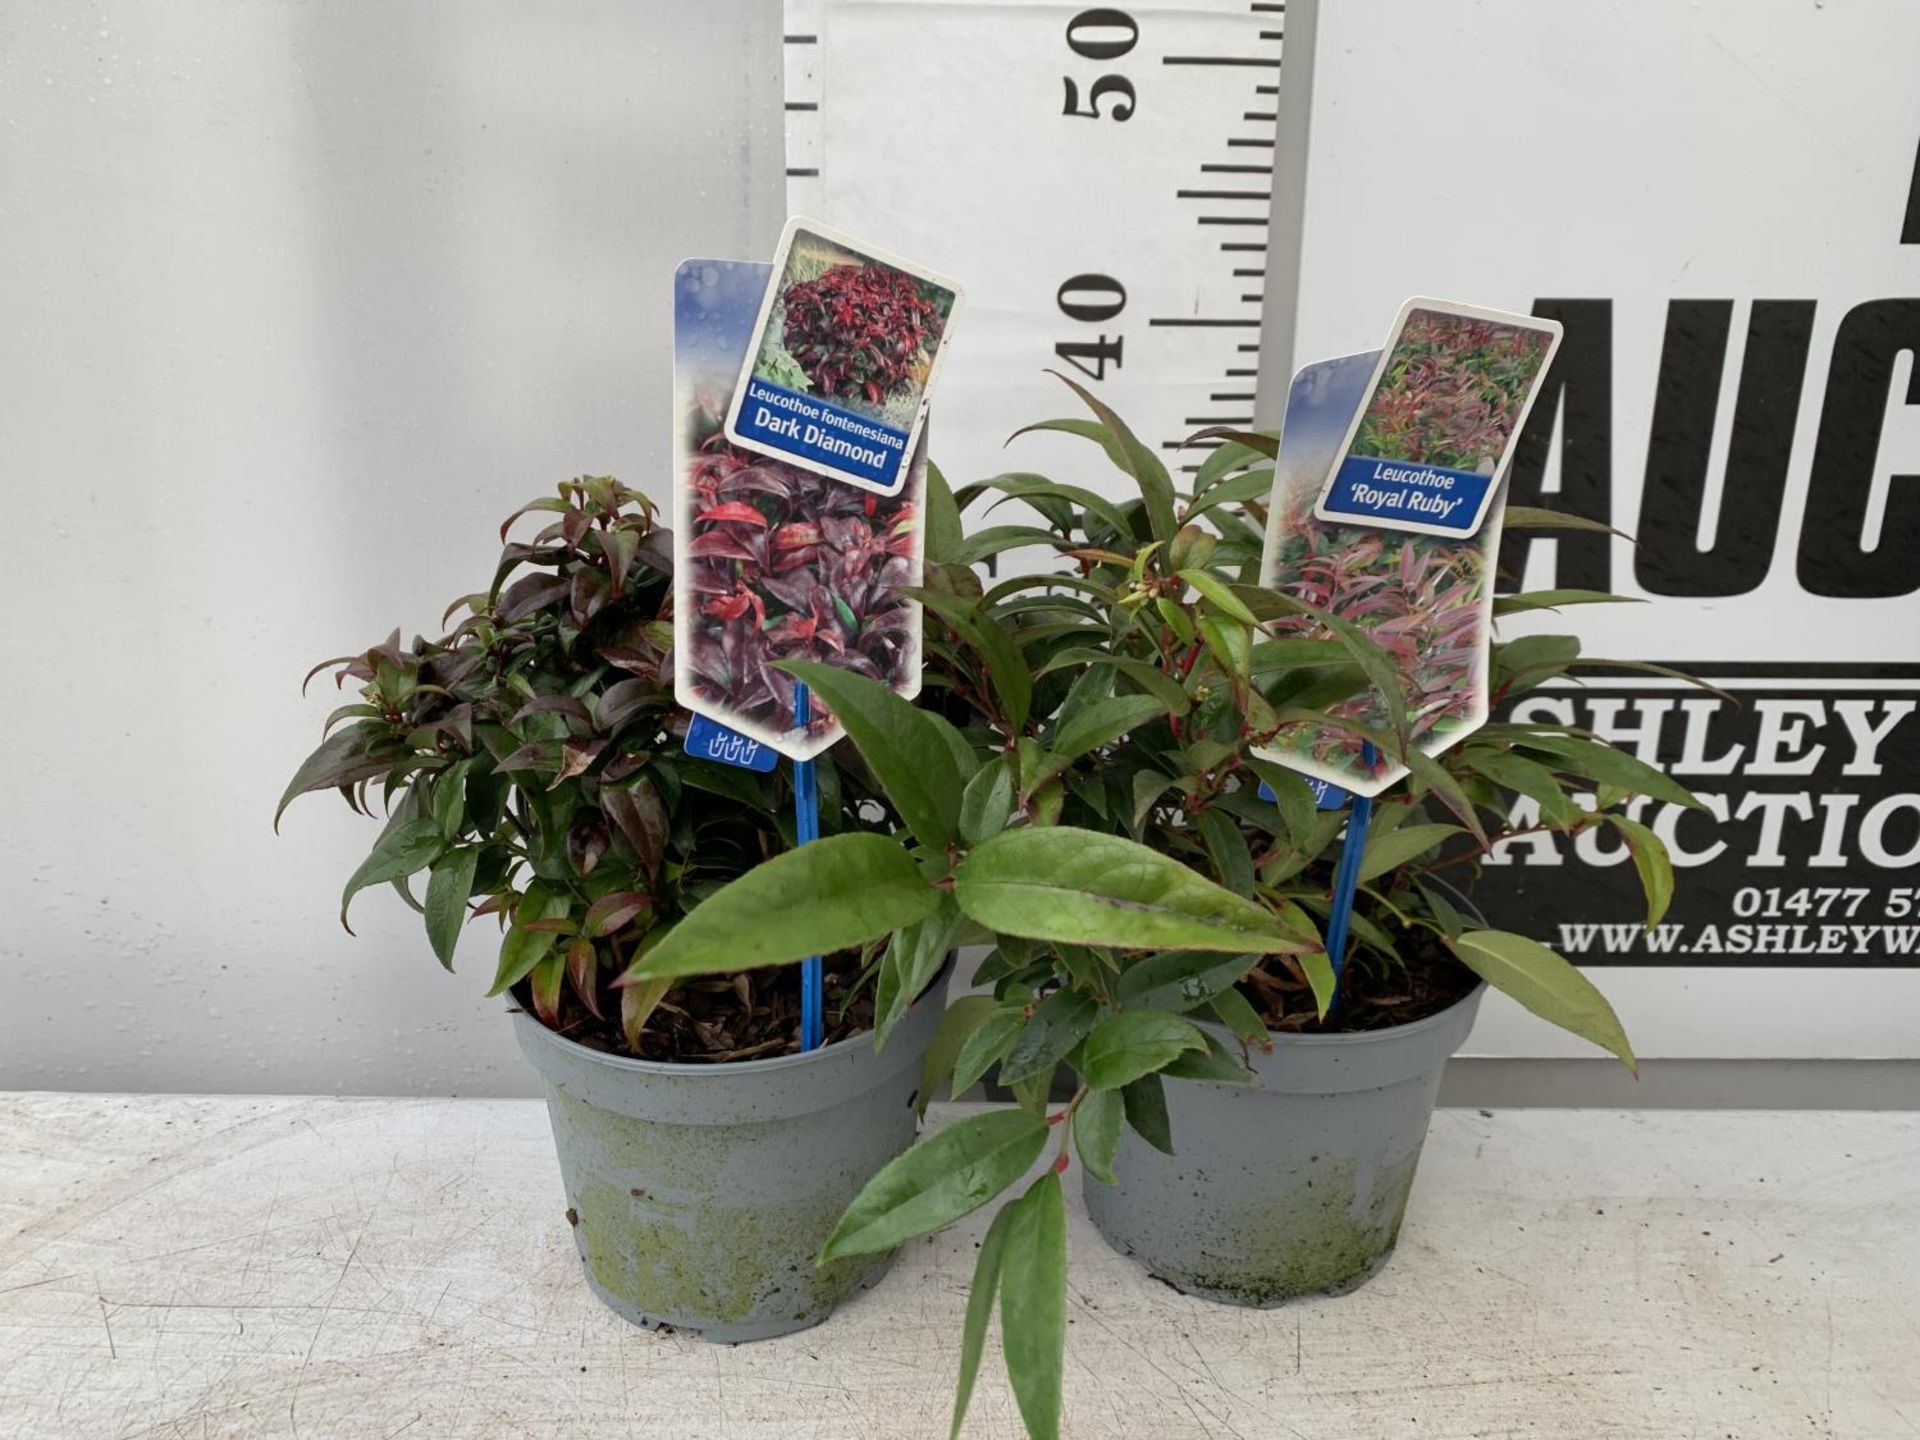 TWO LEUCOTHOE 'ROYAL RUBY' AND 'DARK DIAMOND' IN 2 LTR POTS 35CM TALL PLUS VAT TO BE SOLD FOR THE